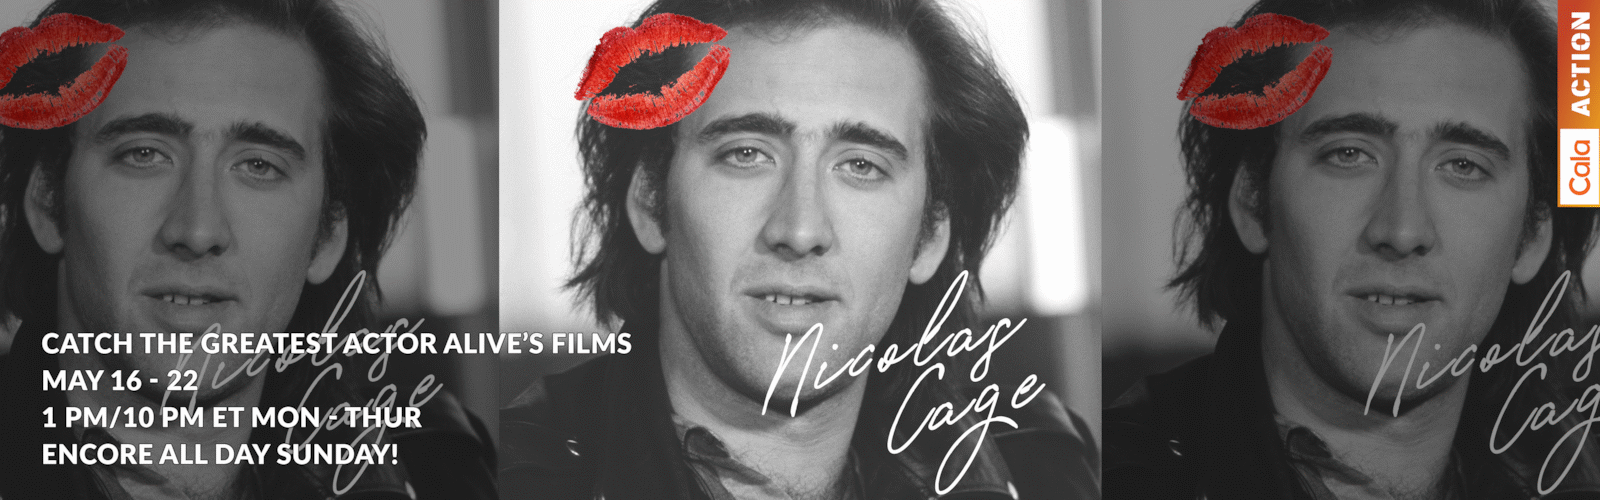 Nic Cage Web BannerImage